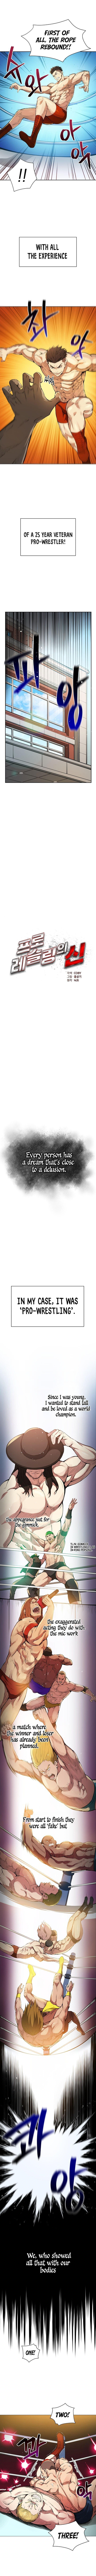 The God of Pro Wrestling - Chapter 1 Page 4